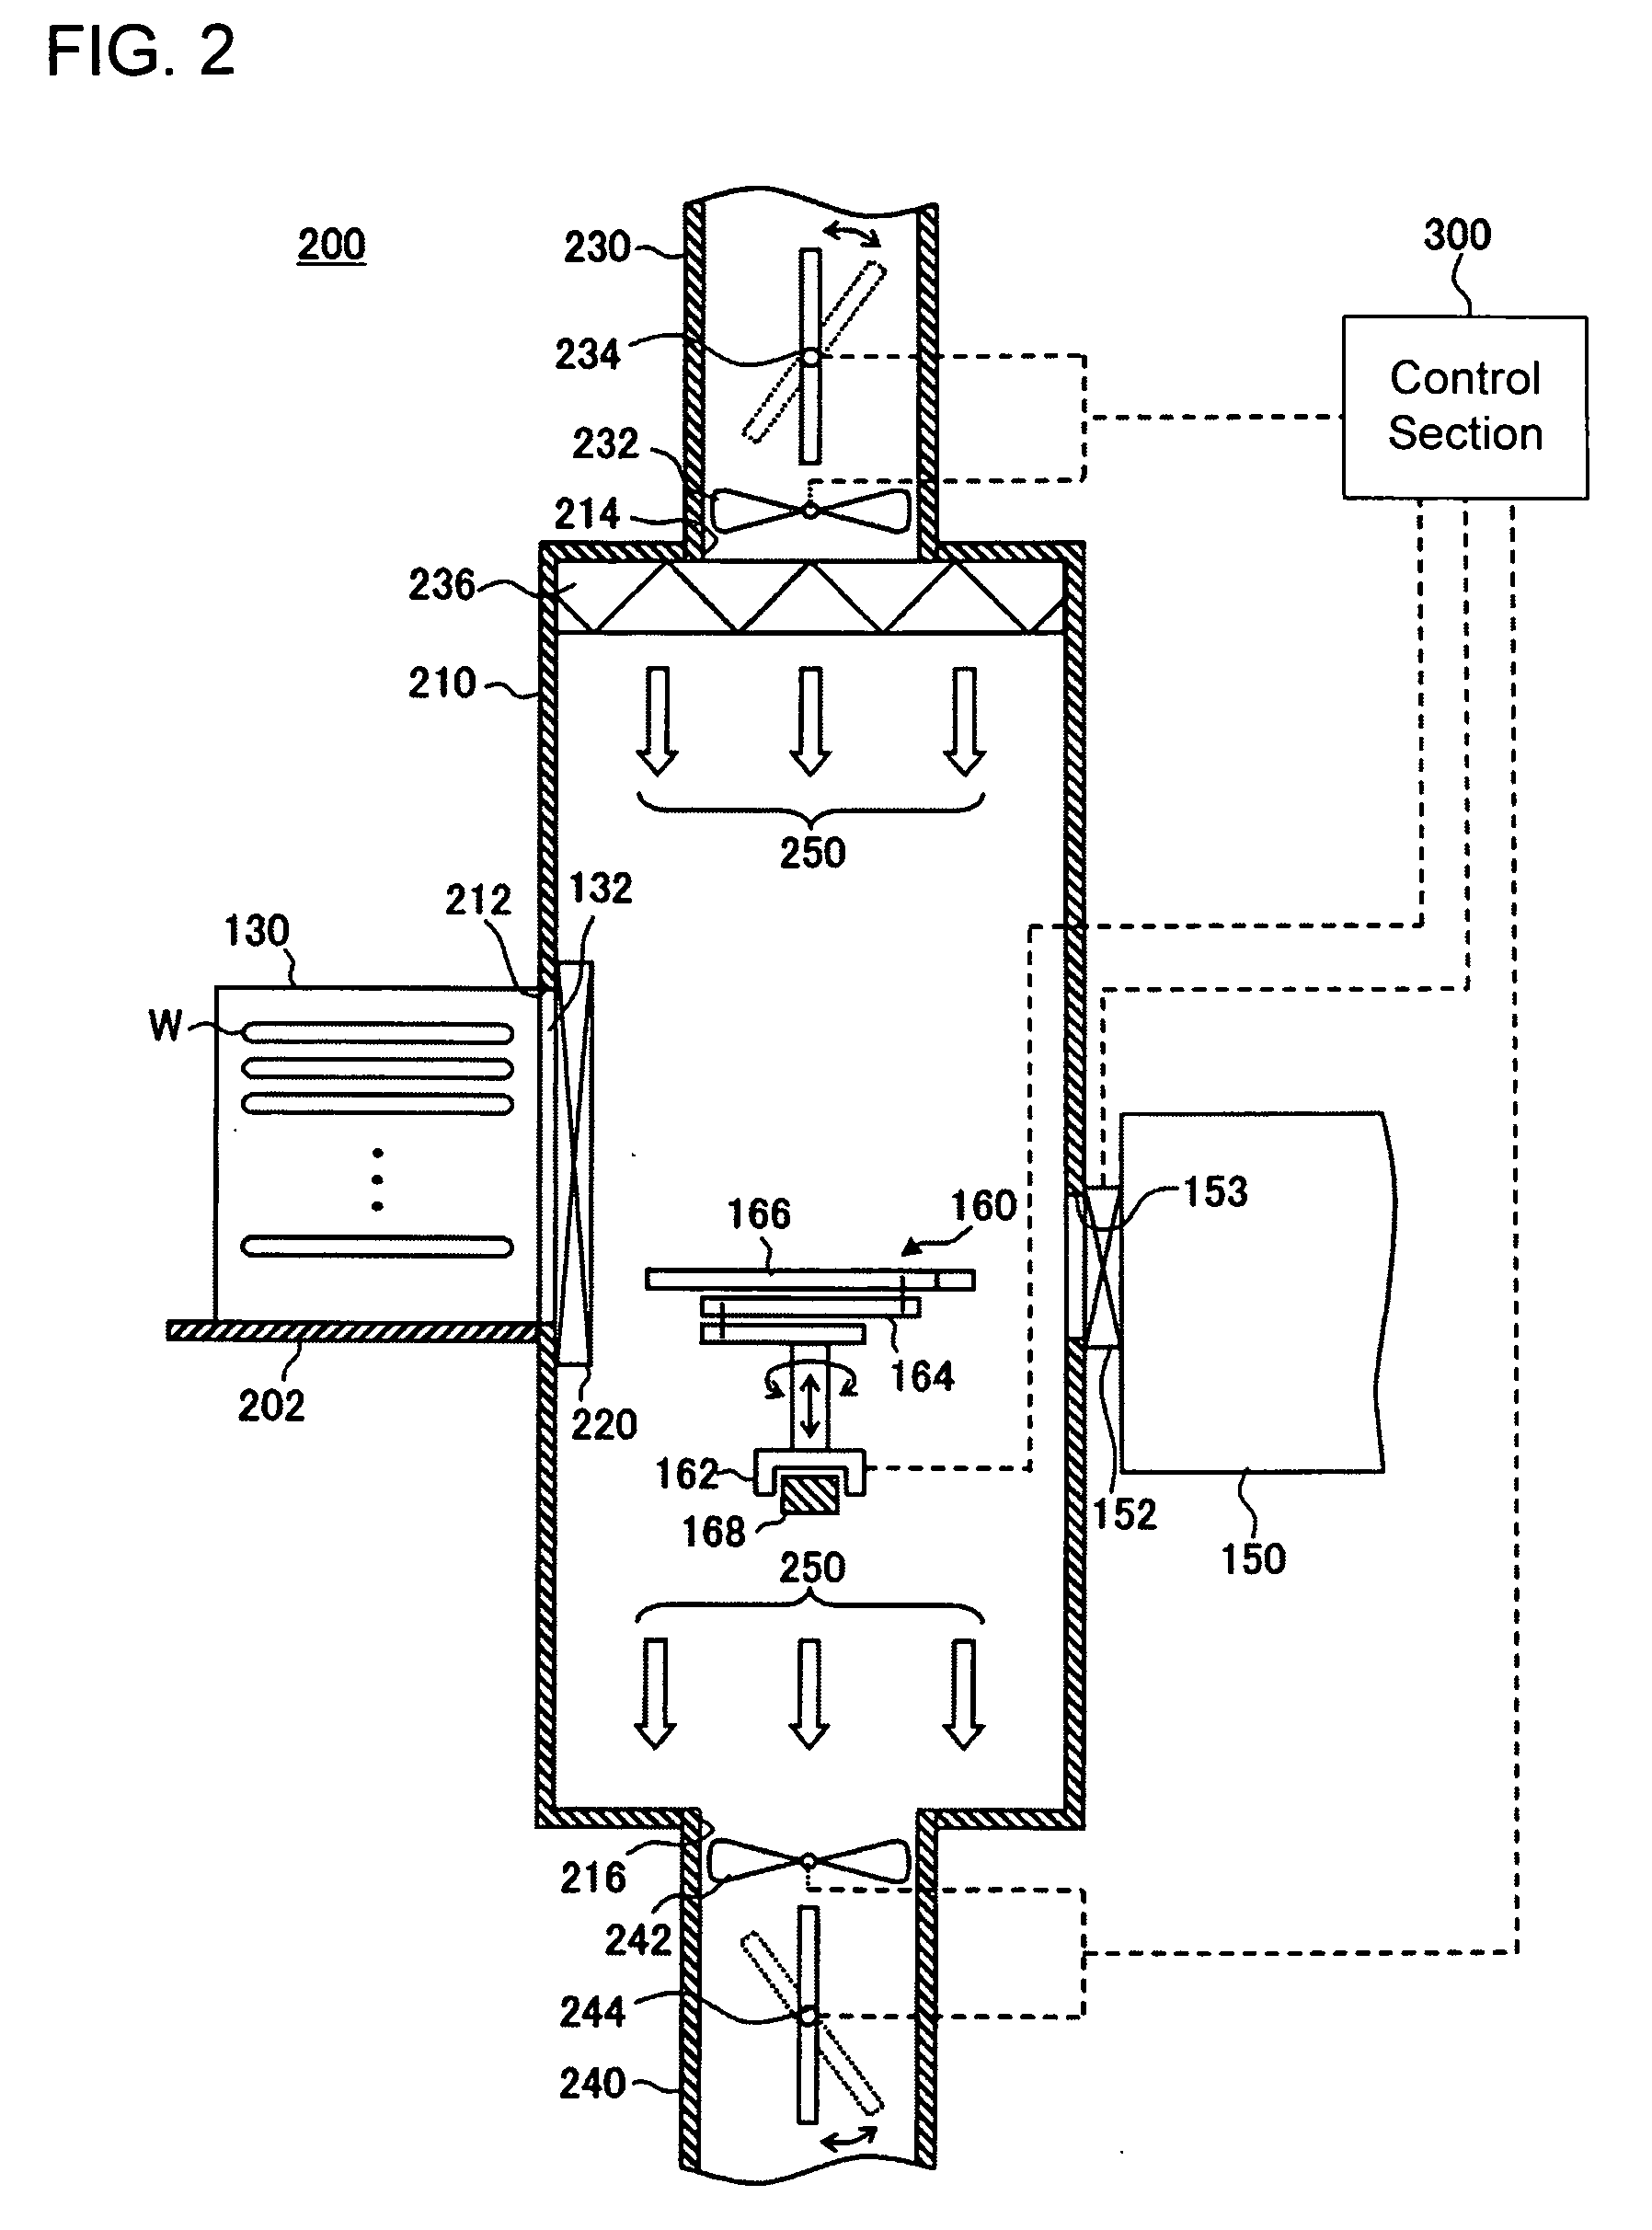 Substrate transfer apparatus and method for controlling down flow